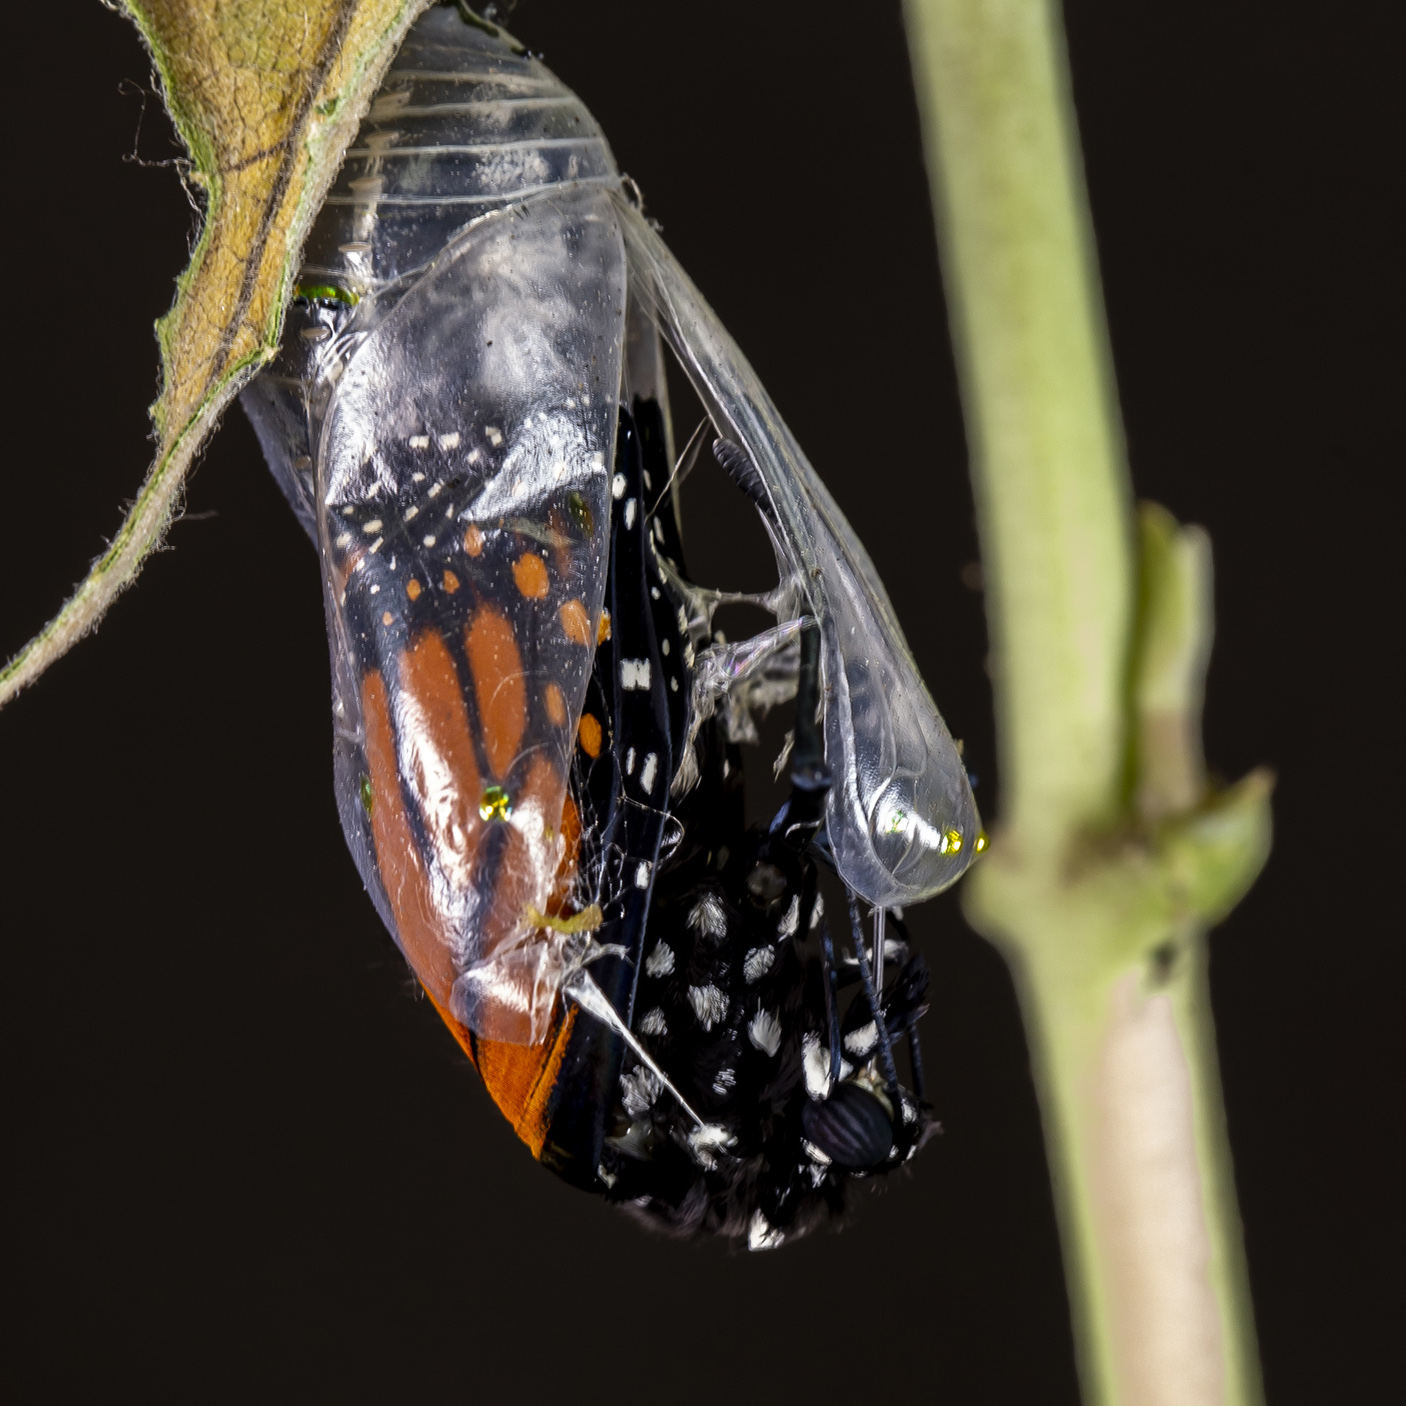 Image of Monarch butterfly emerging from its chrysalis